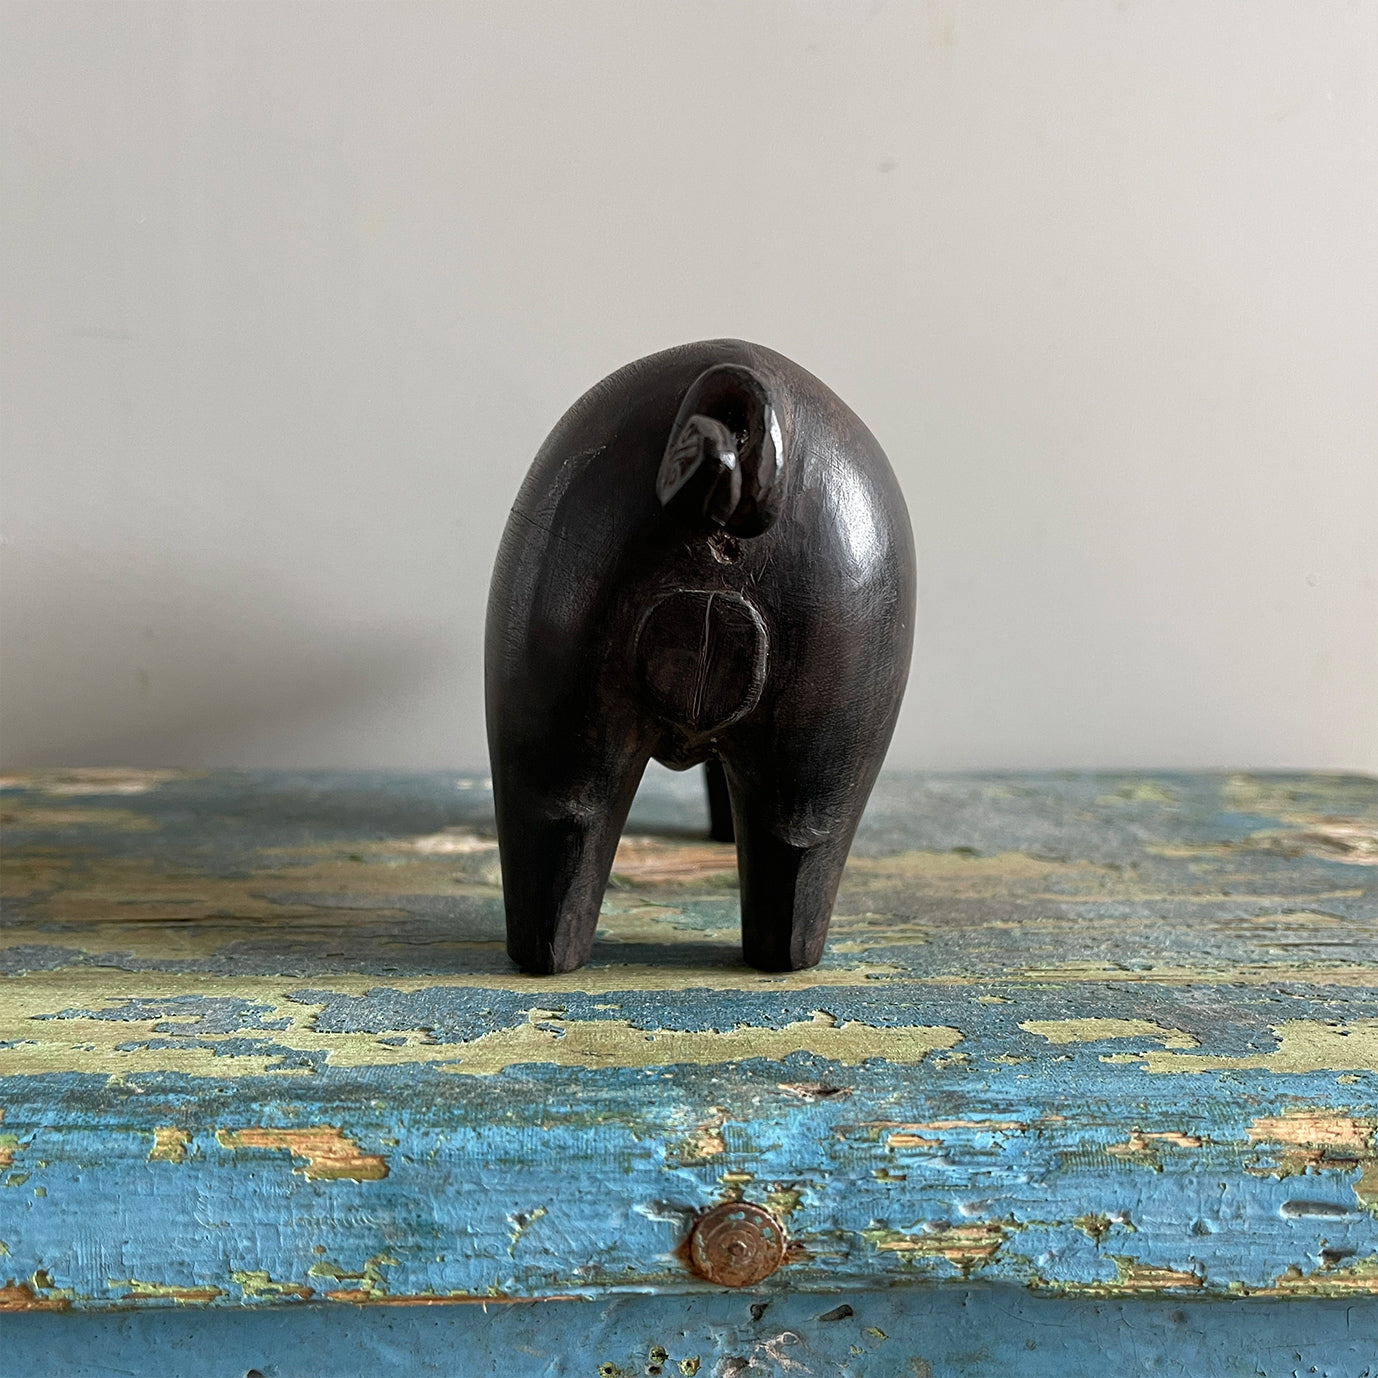 A superb tribal carving of a wild boar. He has a fantastic strong look to him, with a Mohican like mane, super curly tail with snakes head detail carved in. A very fine specimen! SHOP NOW - www.intovintage.co.uk